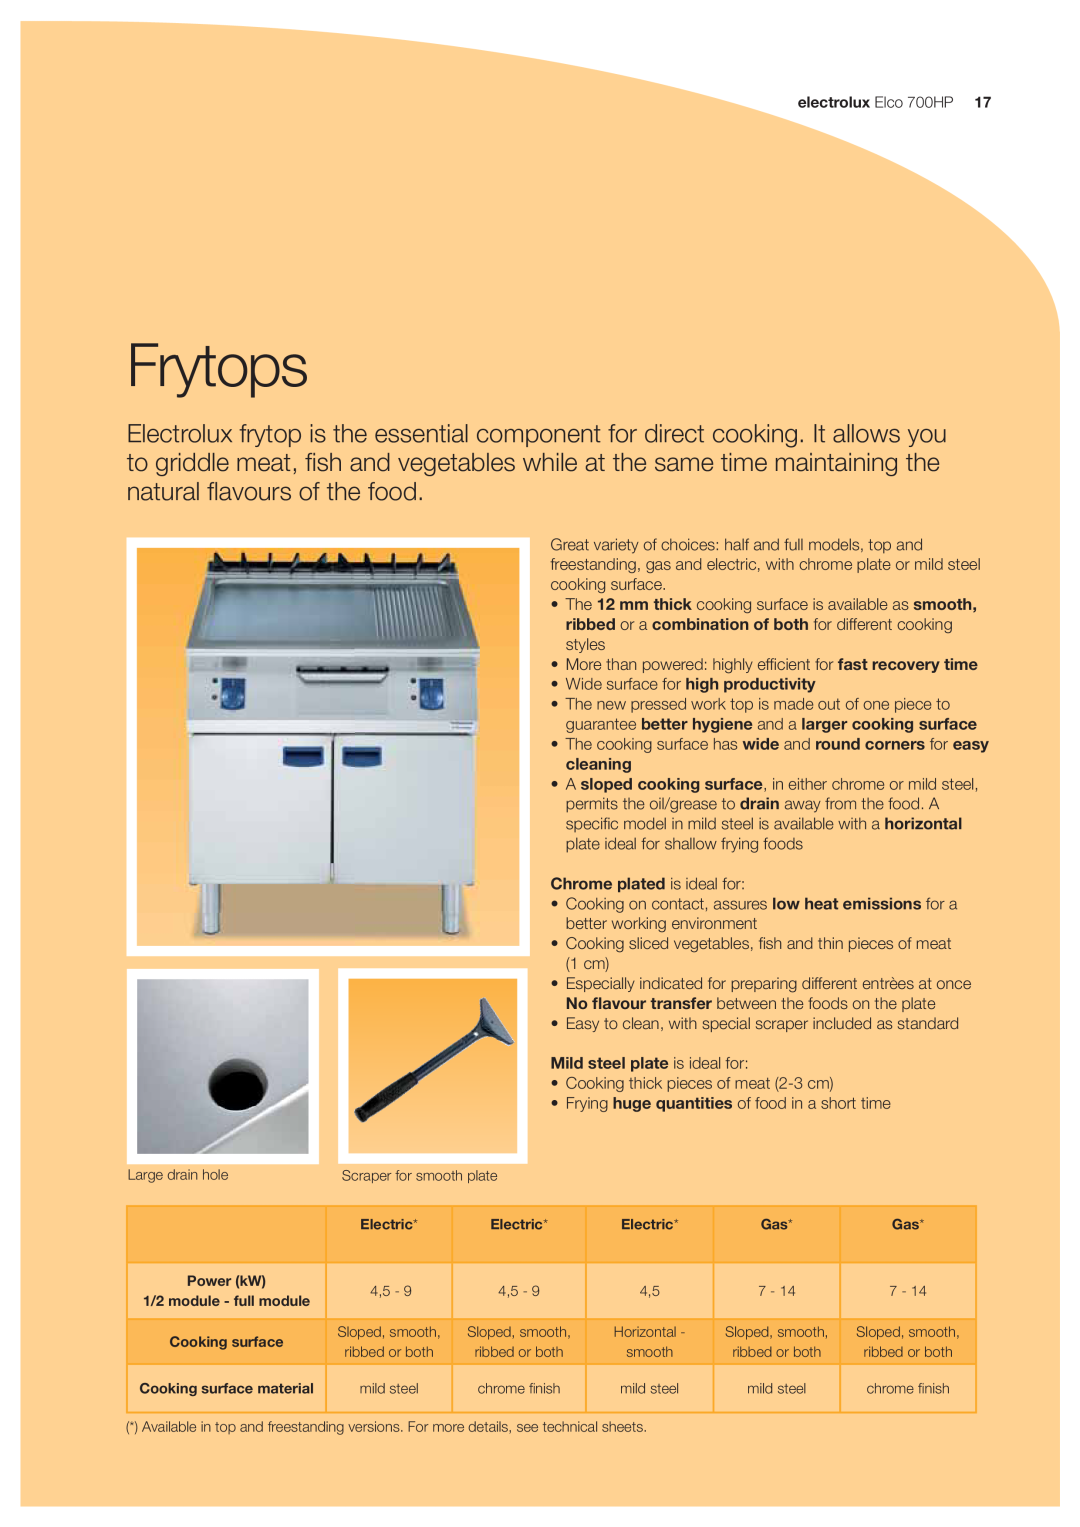 Electrolux 700HP manual Frytops, Chrome plated is ideal for, Mild steel plate is ideal for 